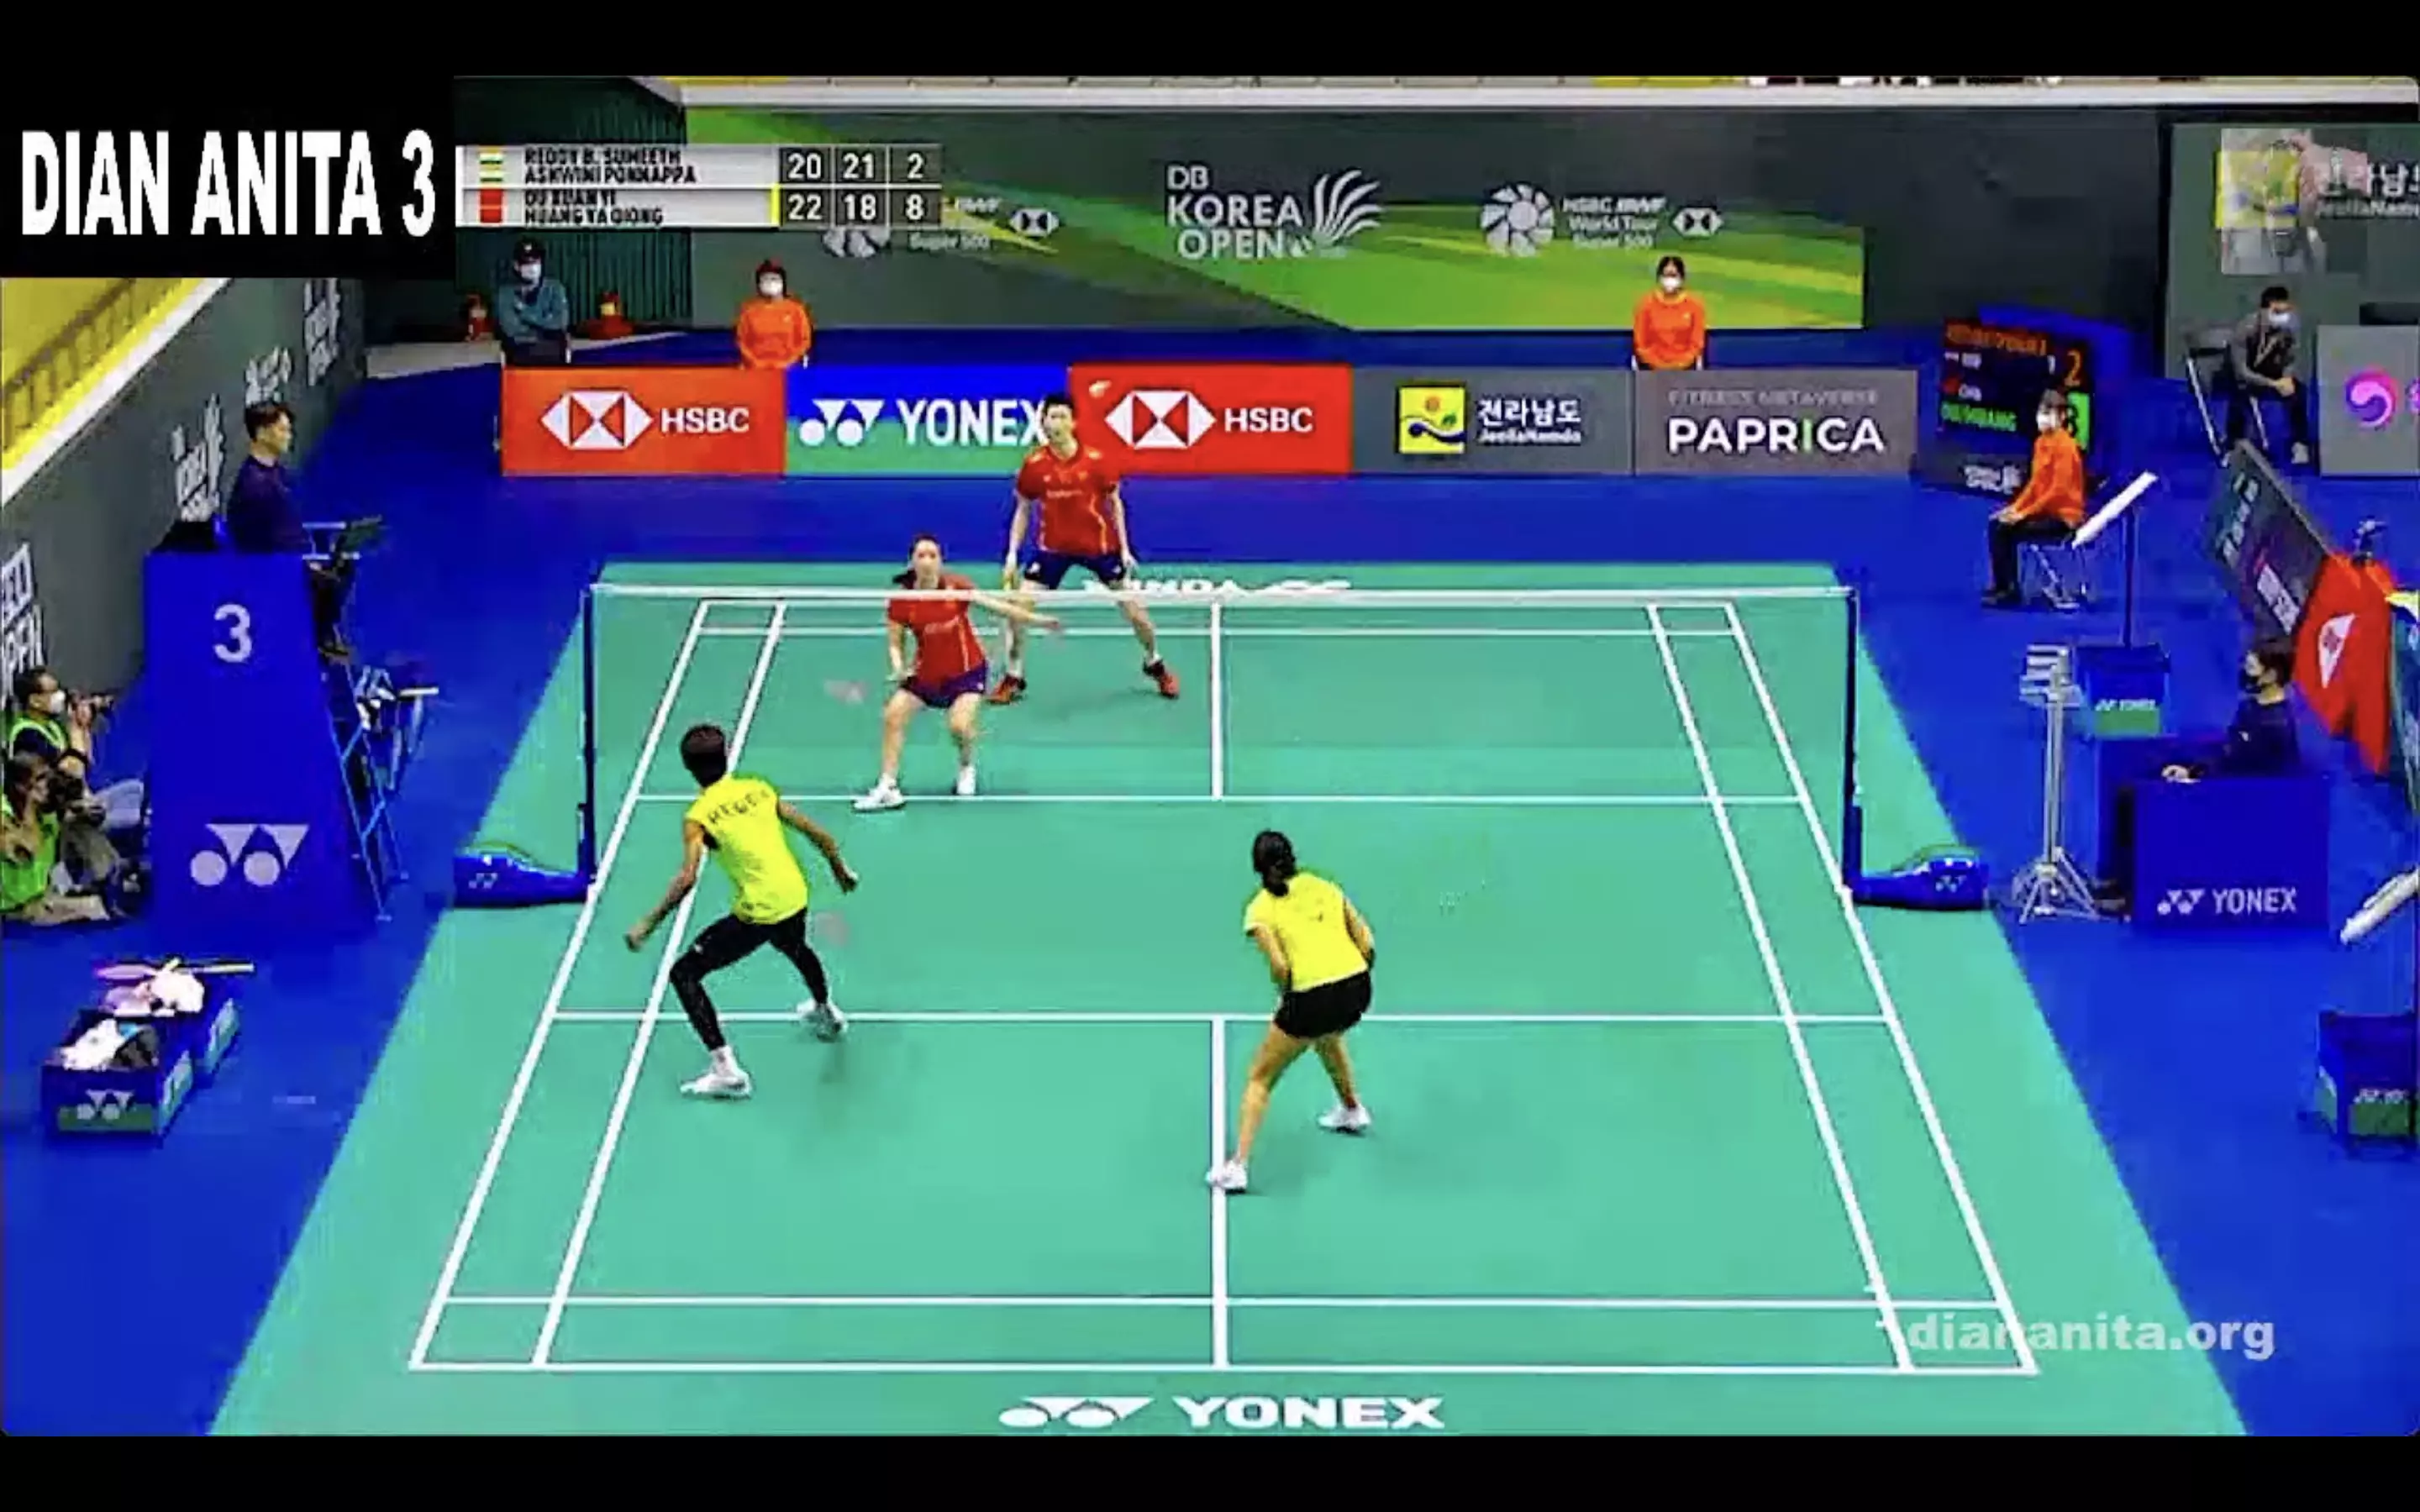 Into the decider, Ashwini-Sumeeth lose steam as the Chinese pair attack...